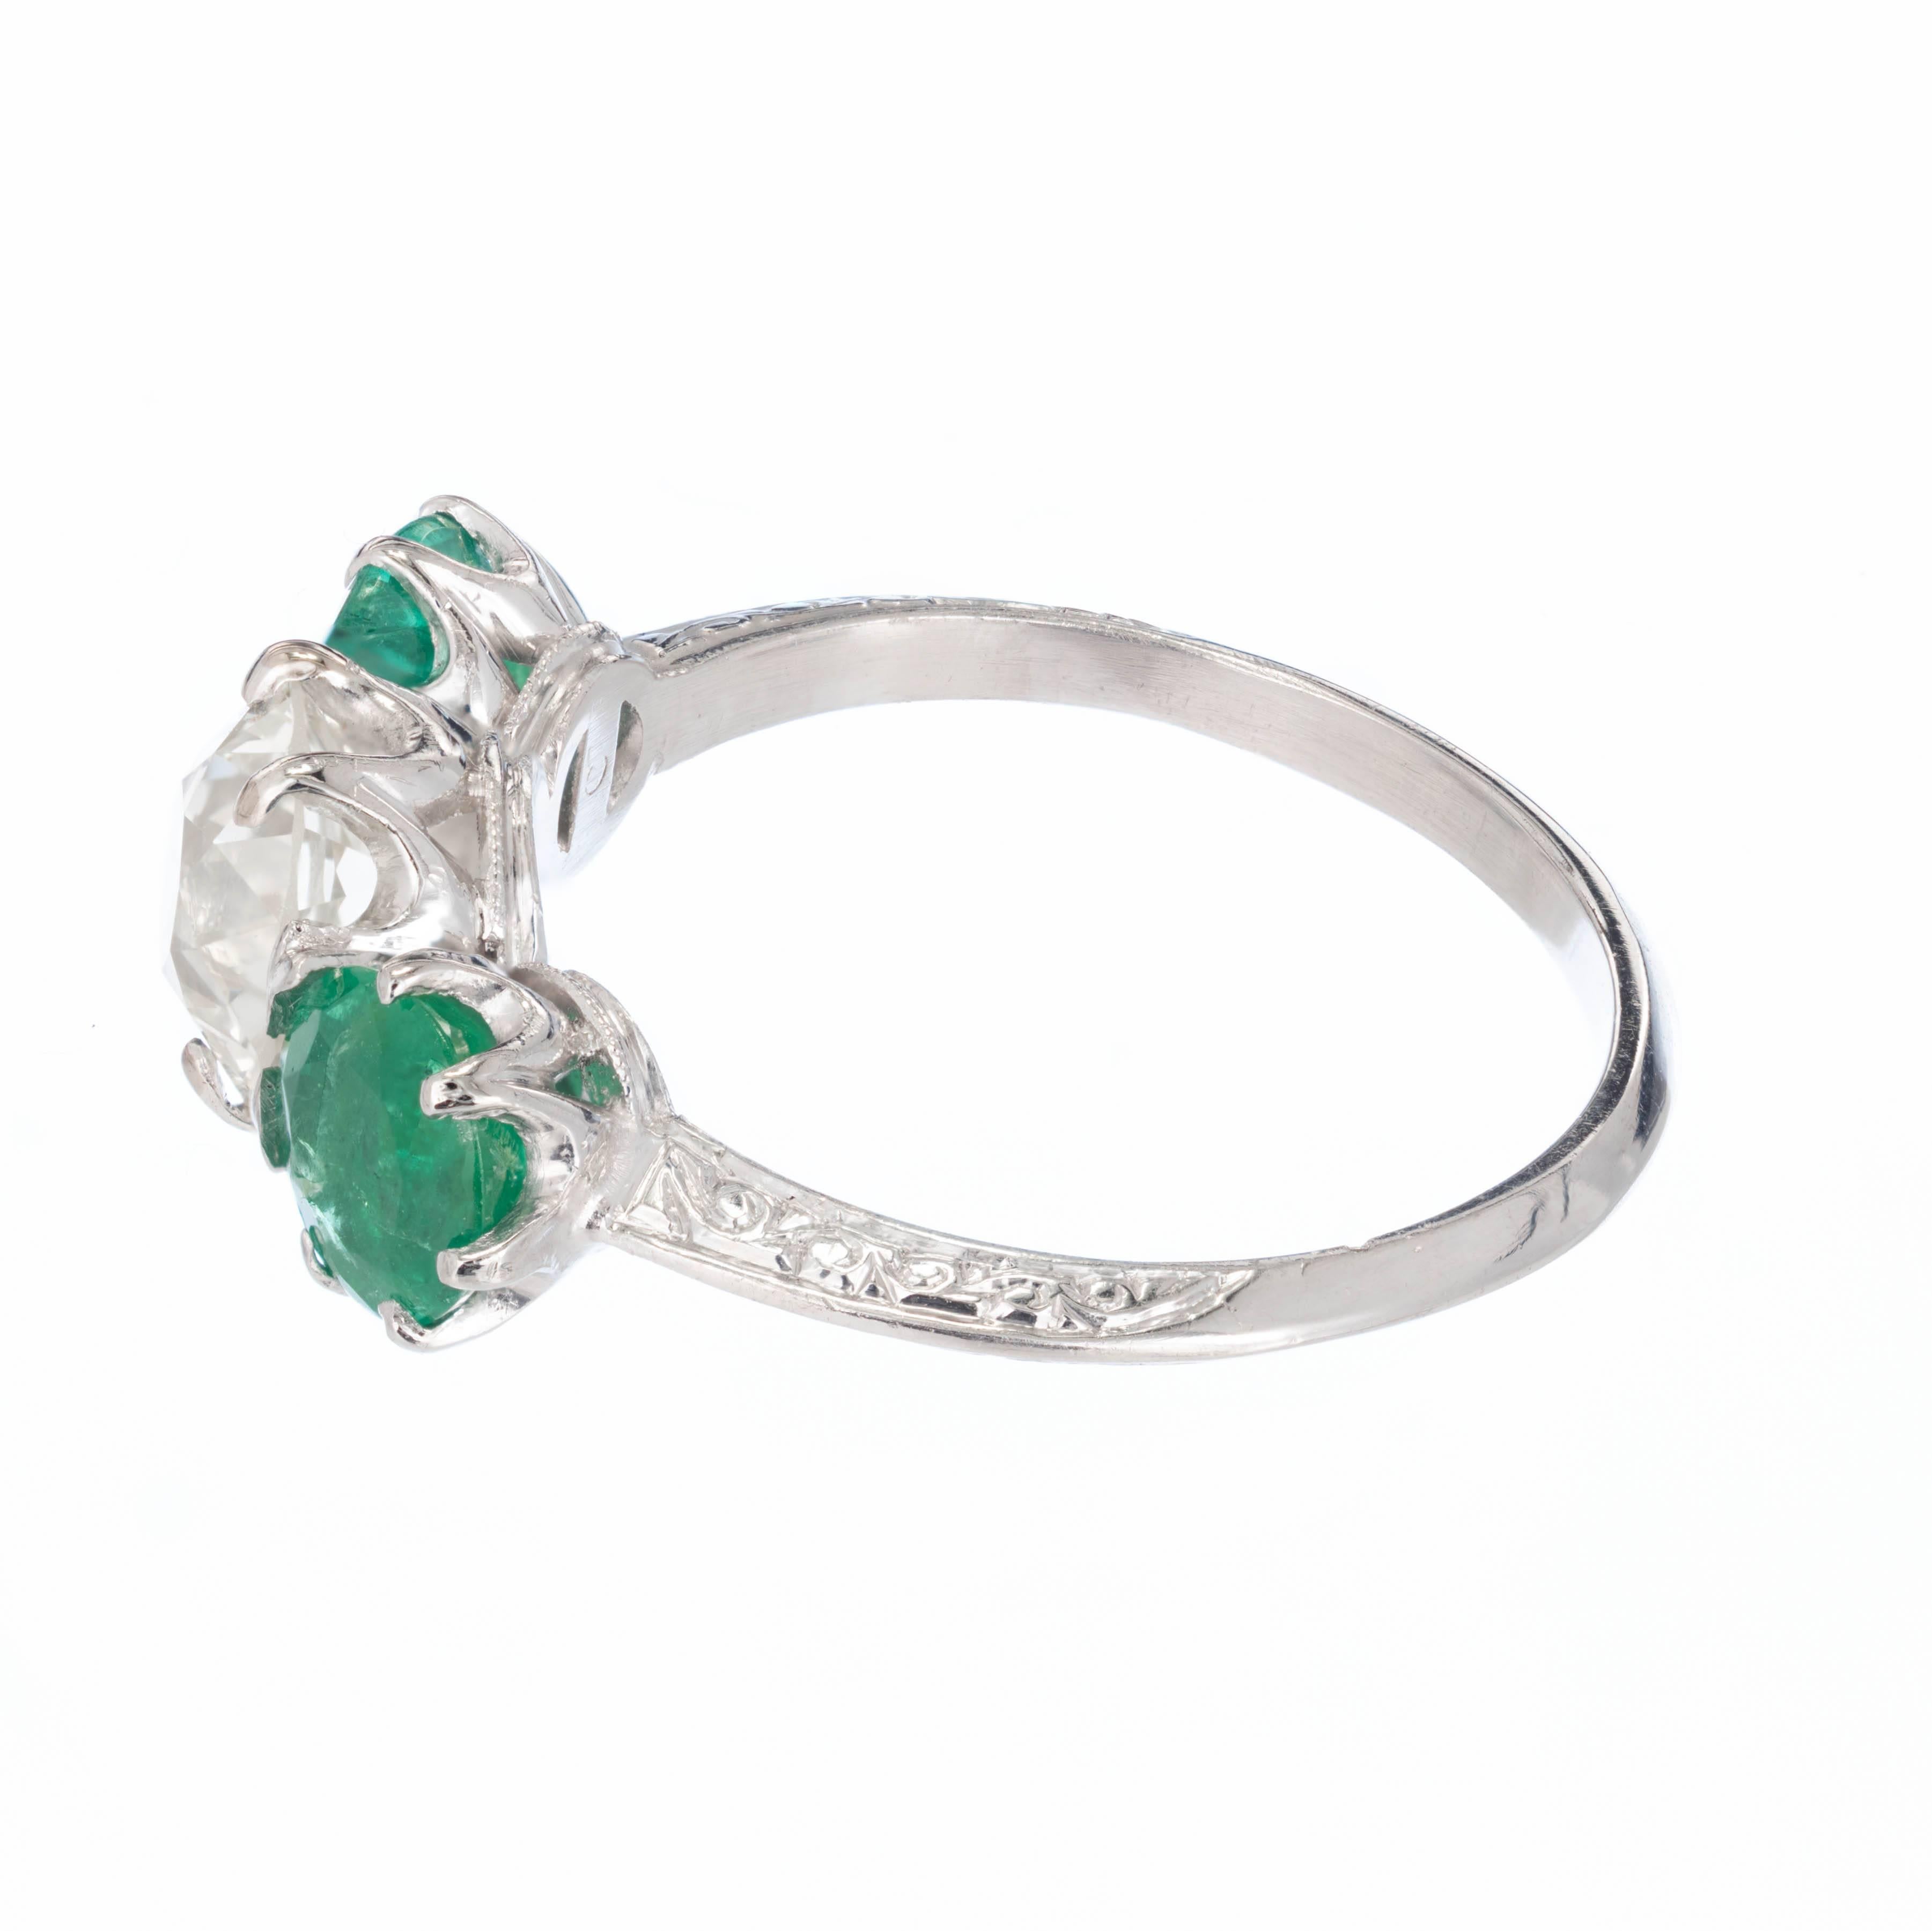 Art Deco diamond and emerald engagement ring. delicate engraving and pierced work. Old European cut round diamond extremely bright and well cut, with two bright green emeralds on each side. Moderately clear and moderately included. The color of the